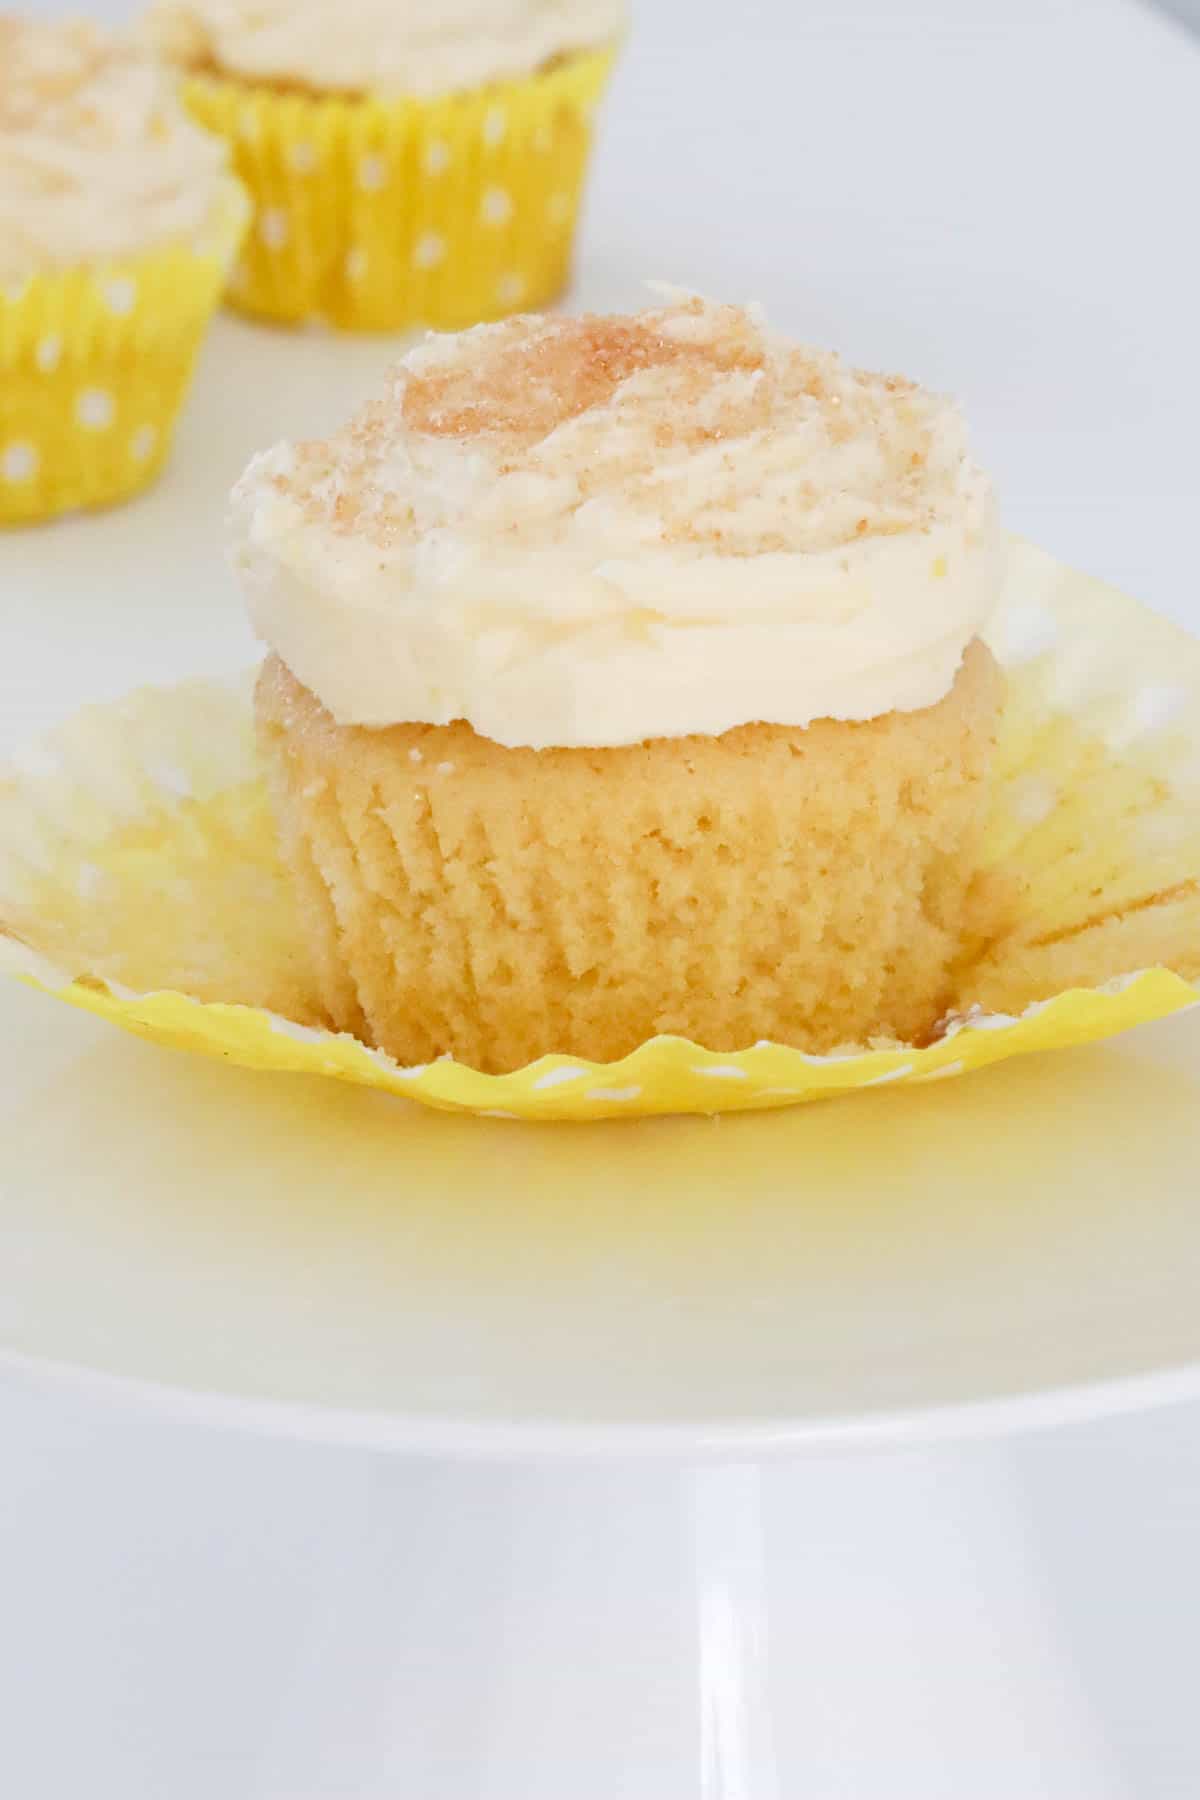 A lemon cupcake topped with creamy frosting and edible glitter.